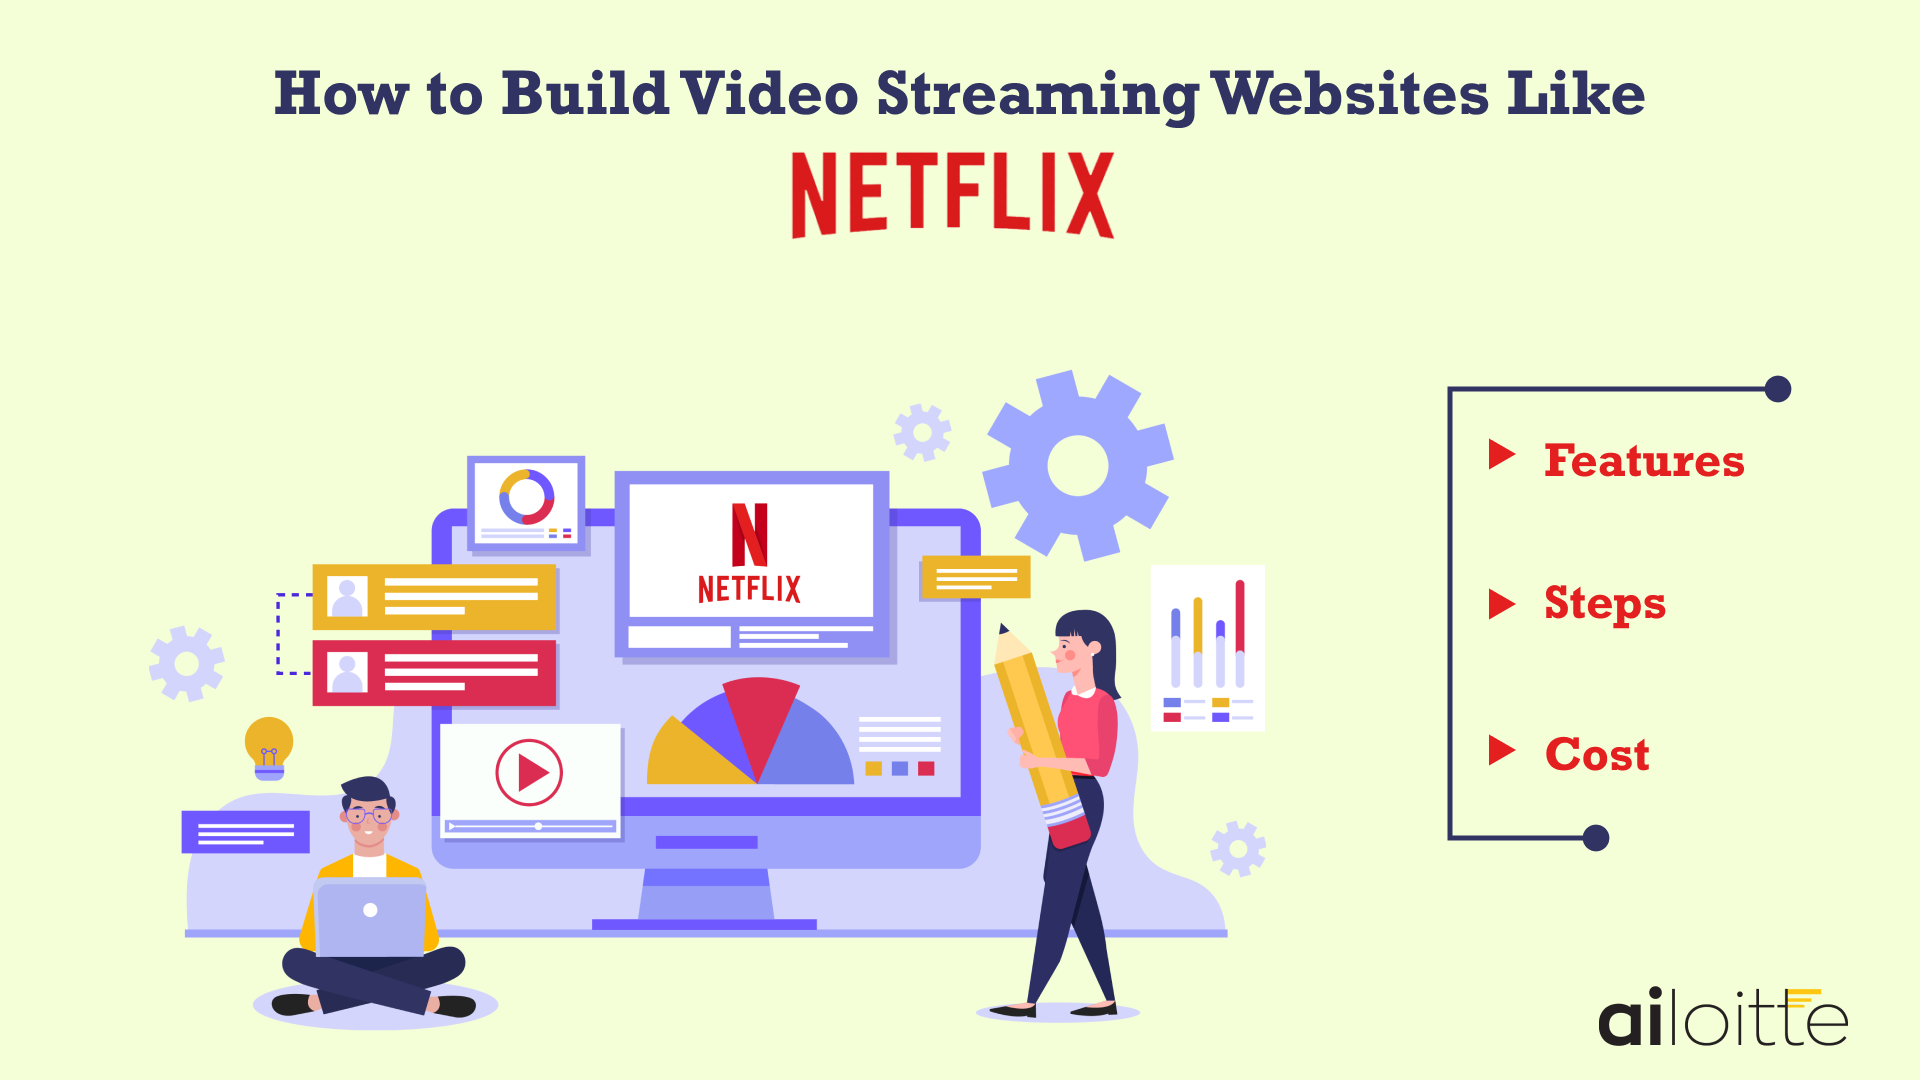 How to Build a Video Streaming Website Like Netflix